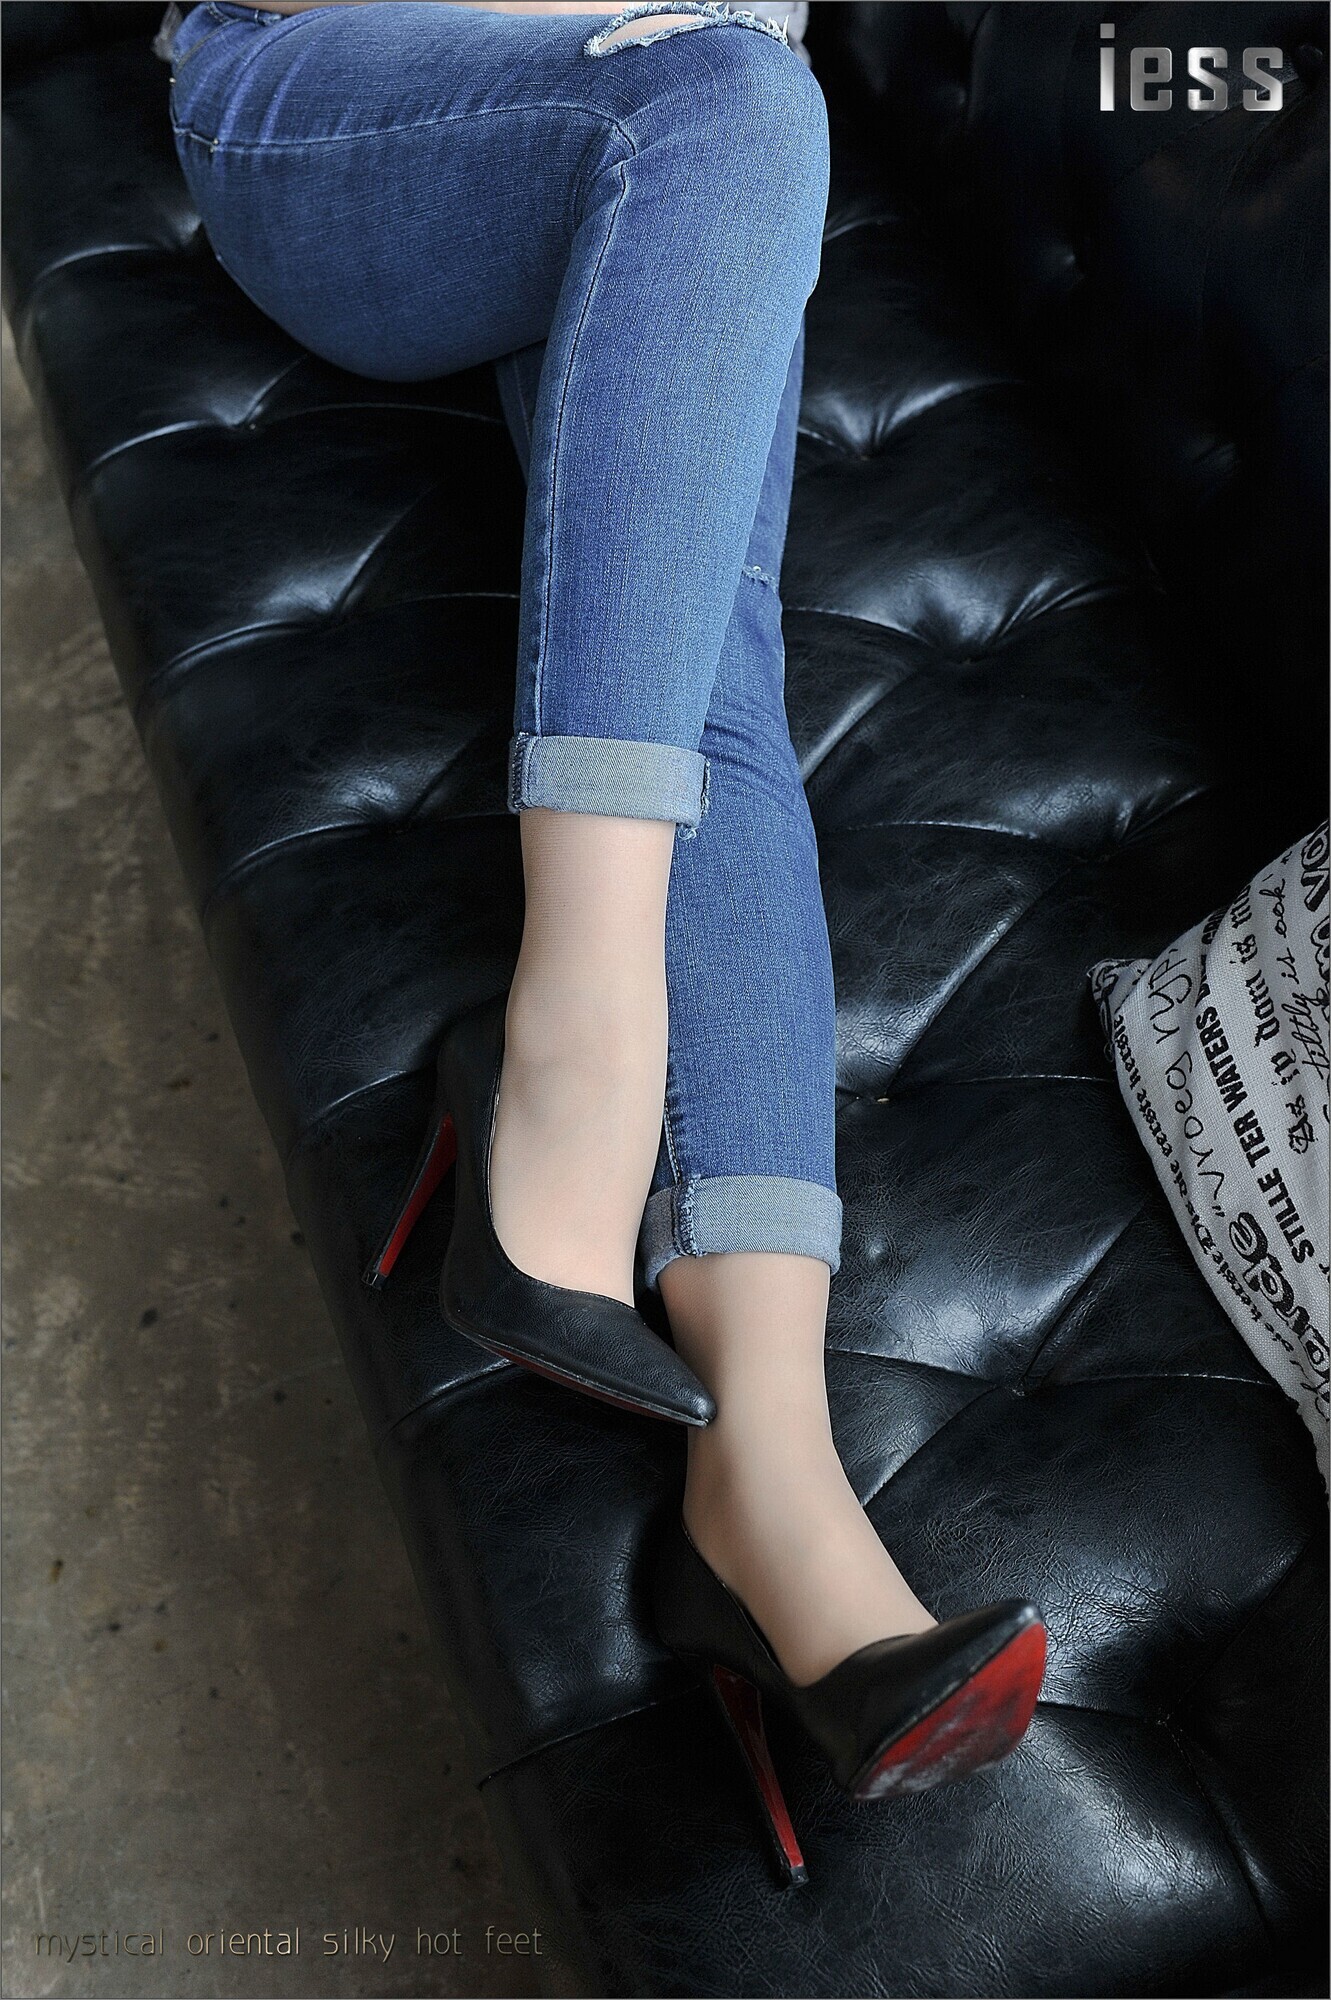 [IESS funny thinking] 2016.09.30 silk foot Bento 007: silk foot high heels and jeans 1 by Zhang Xinyue